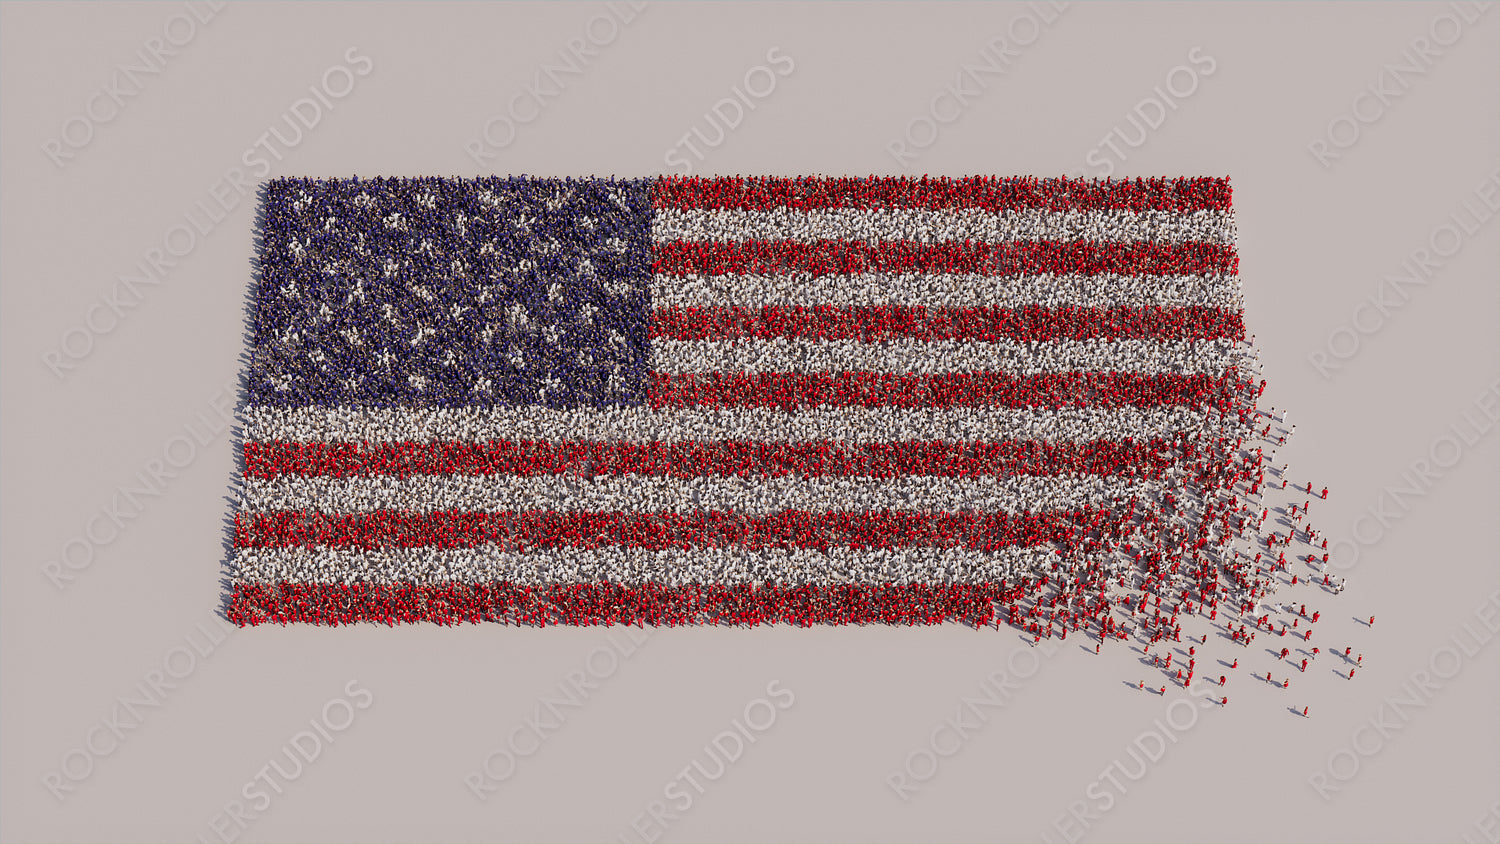 A Crowd of People coming together to form the Flag of USA. American Banner on White.